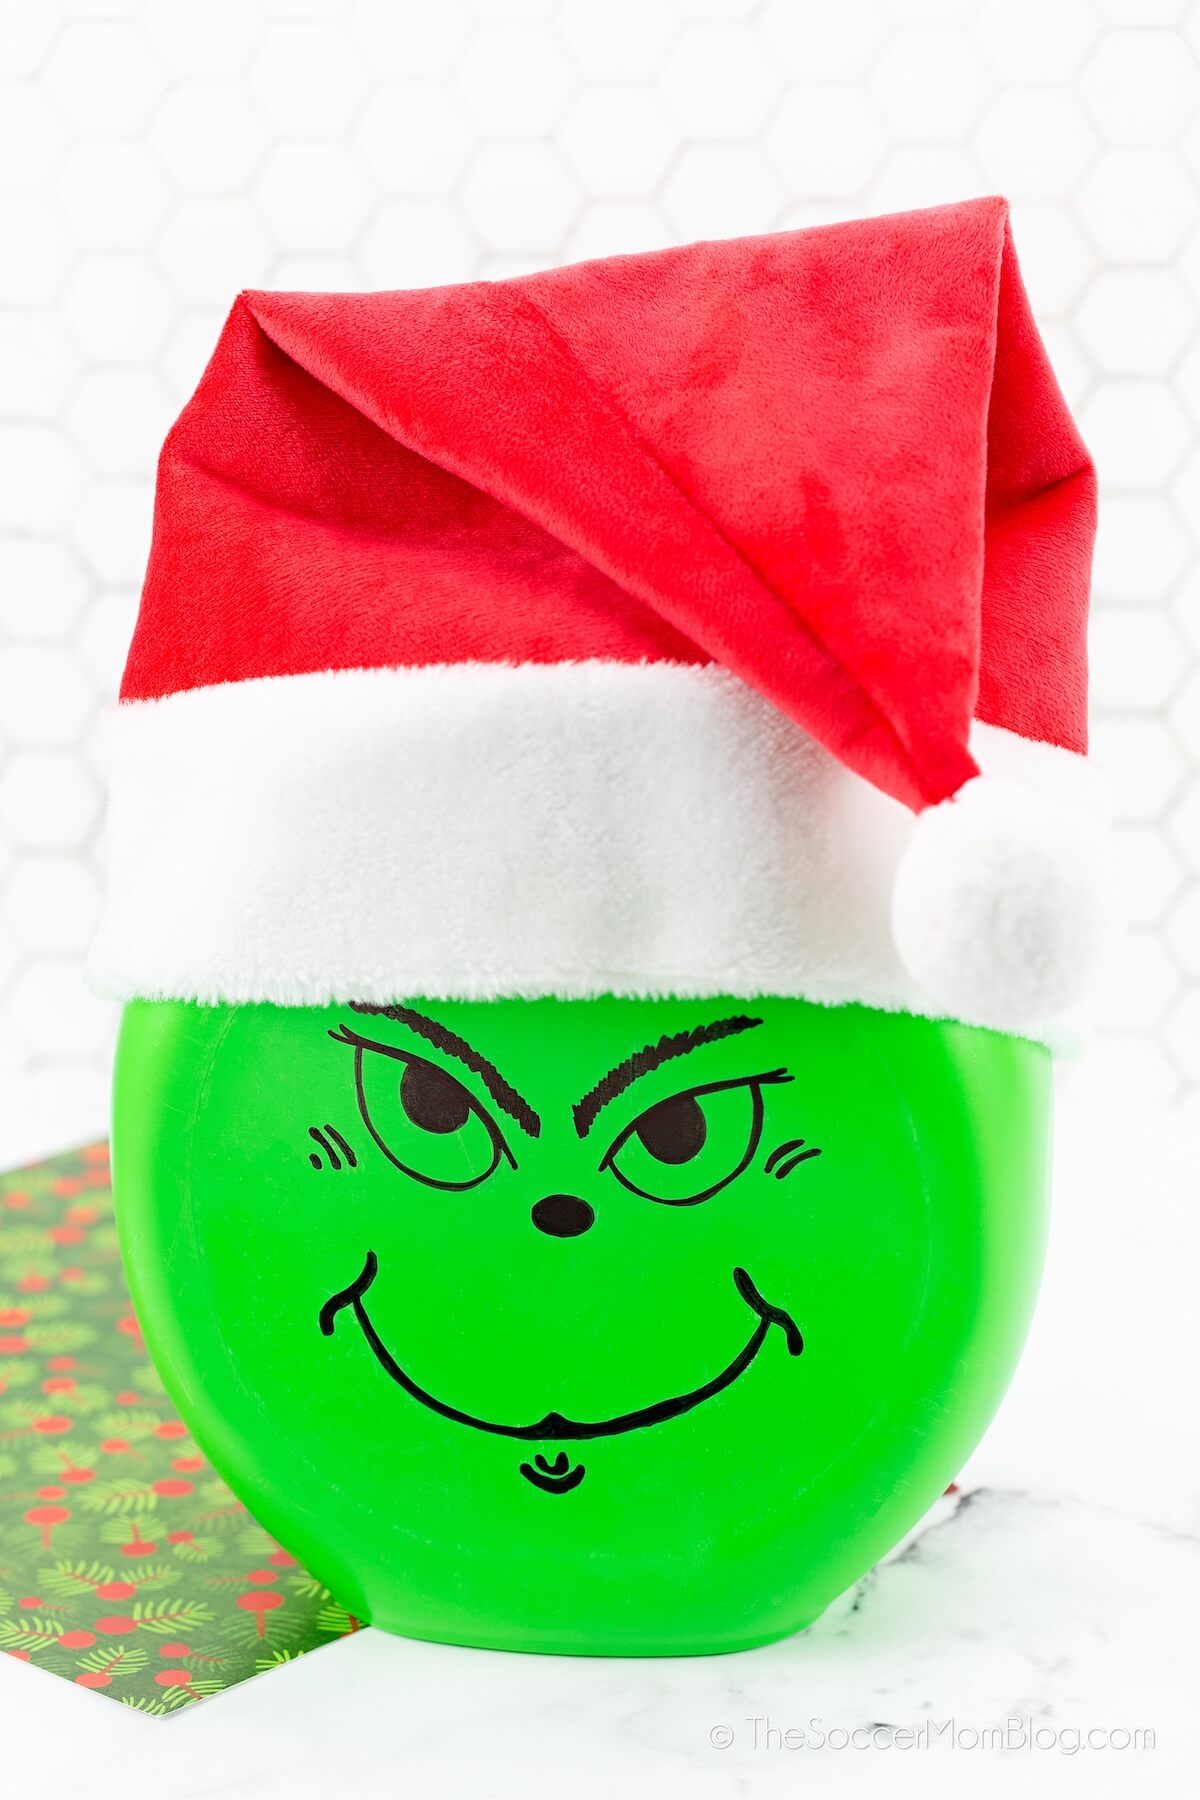 Christmas lantern that looks like the Grinch, made with a Gain pods container